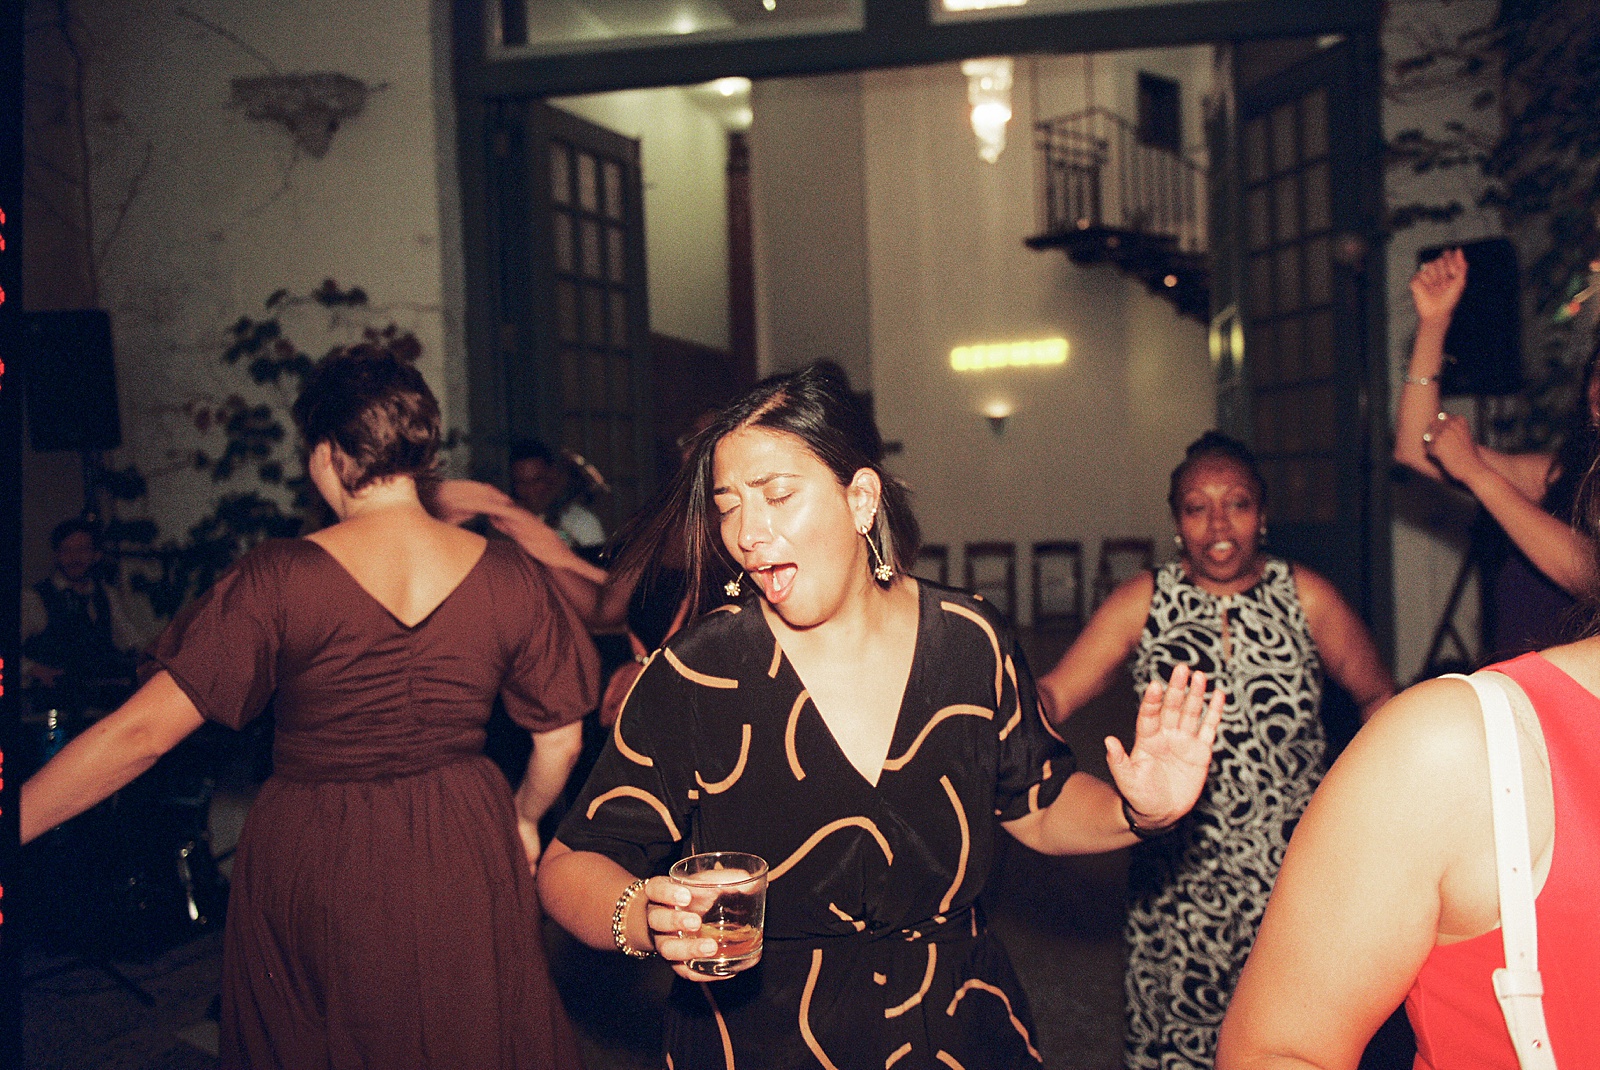 Wedding guests dance in a wedding photo on film.